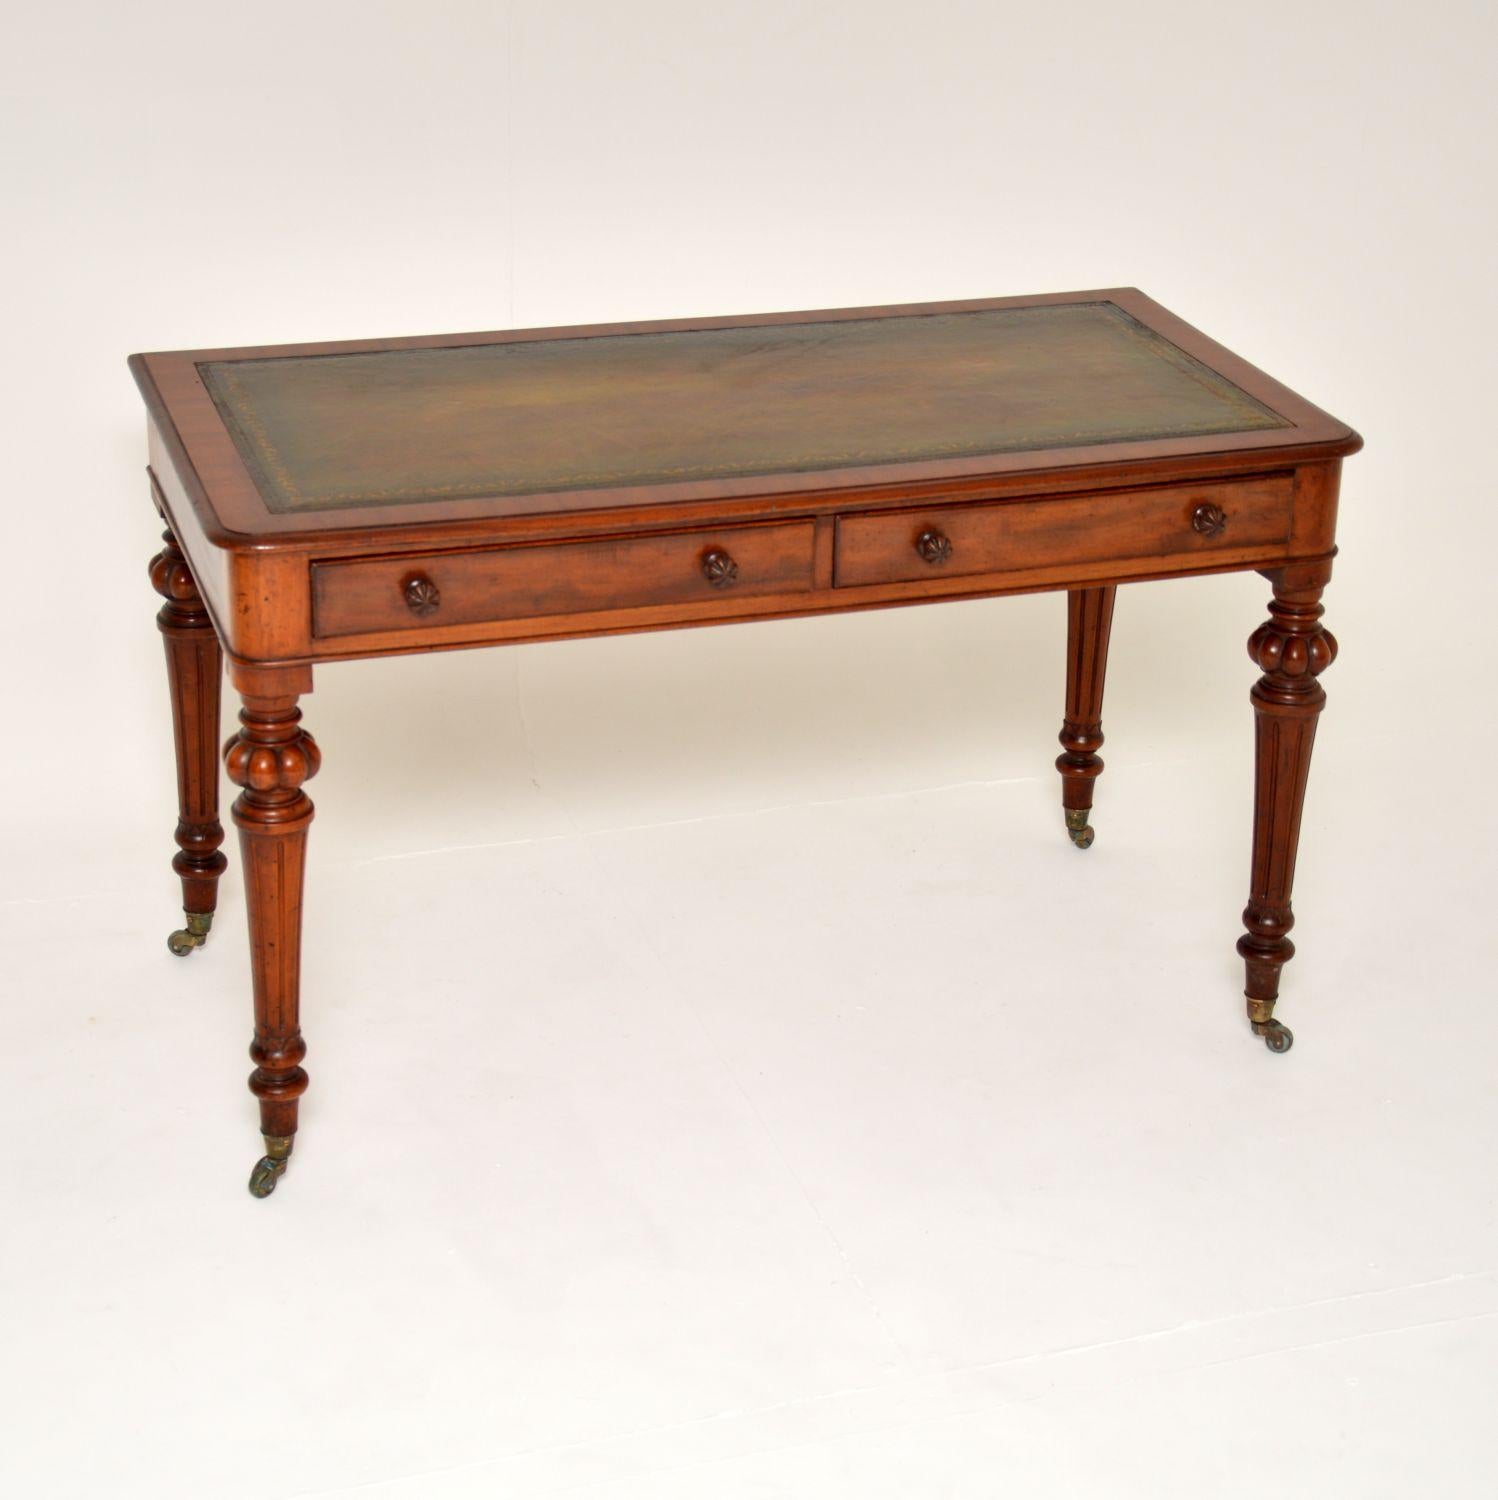 A superb antique William IV period writing table. This was made in England, it dates from around the 1830-40’s period.

It is of amazing quality, with fantastic bold carving around the legs. The handles are also carved in the typical William IV